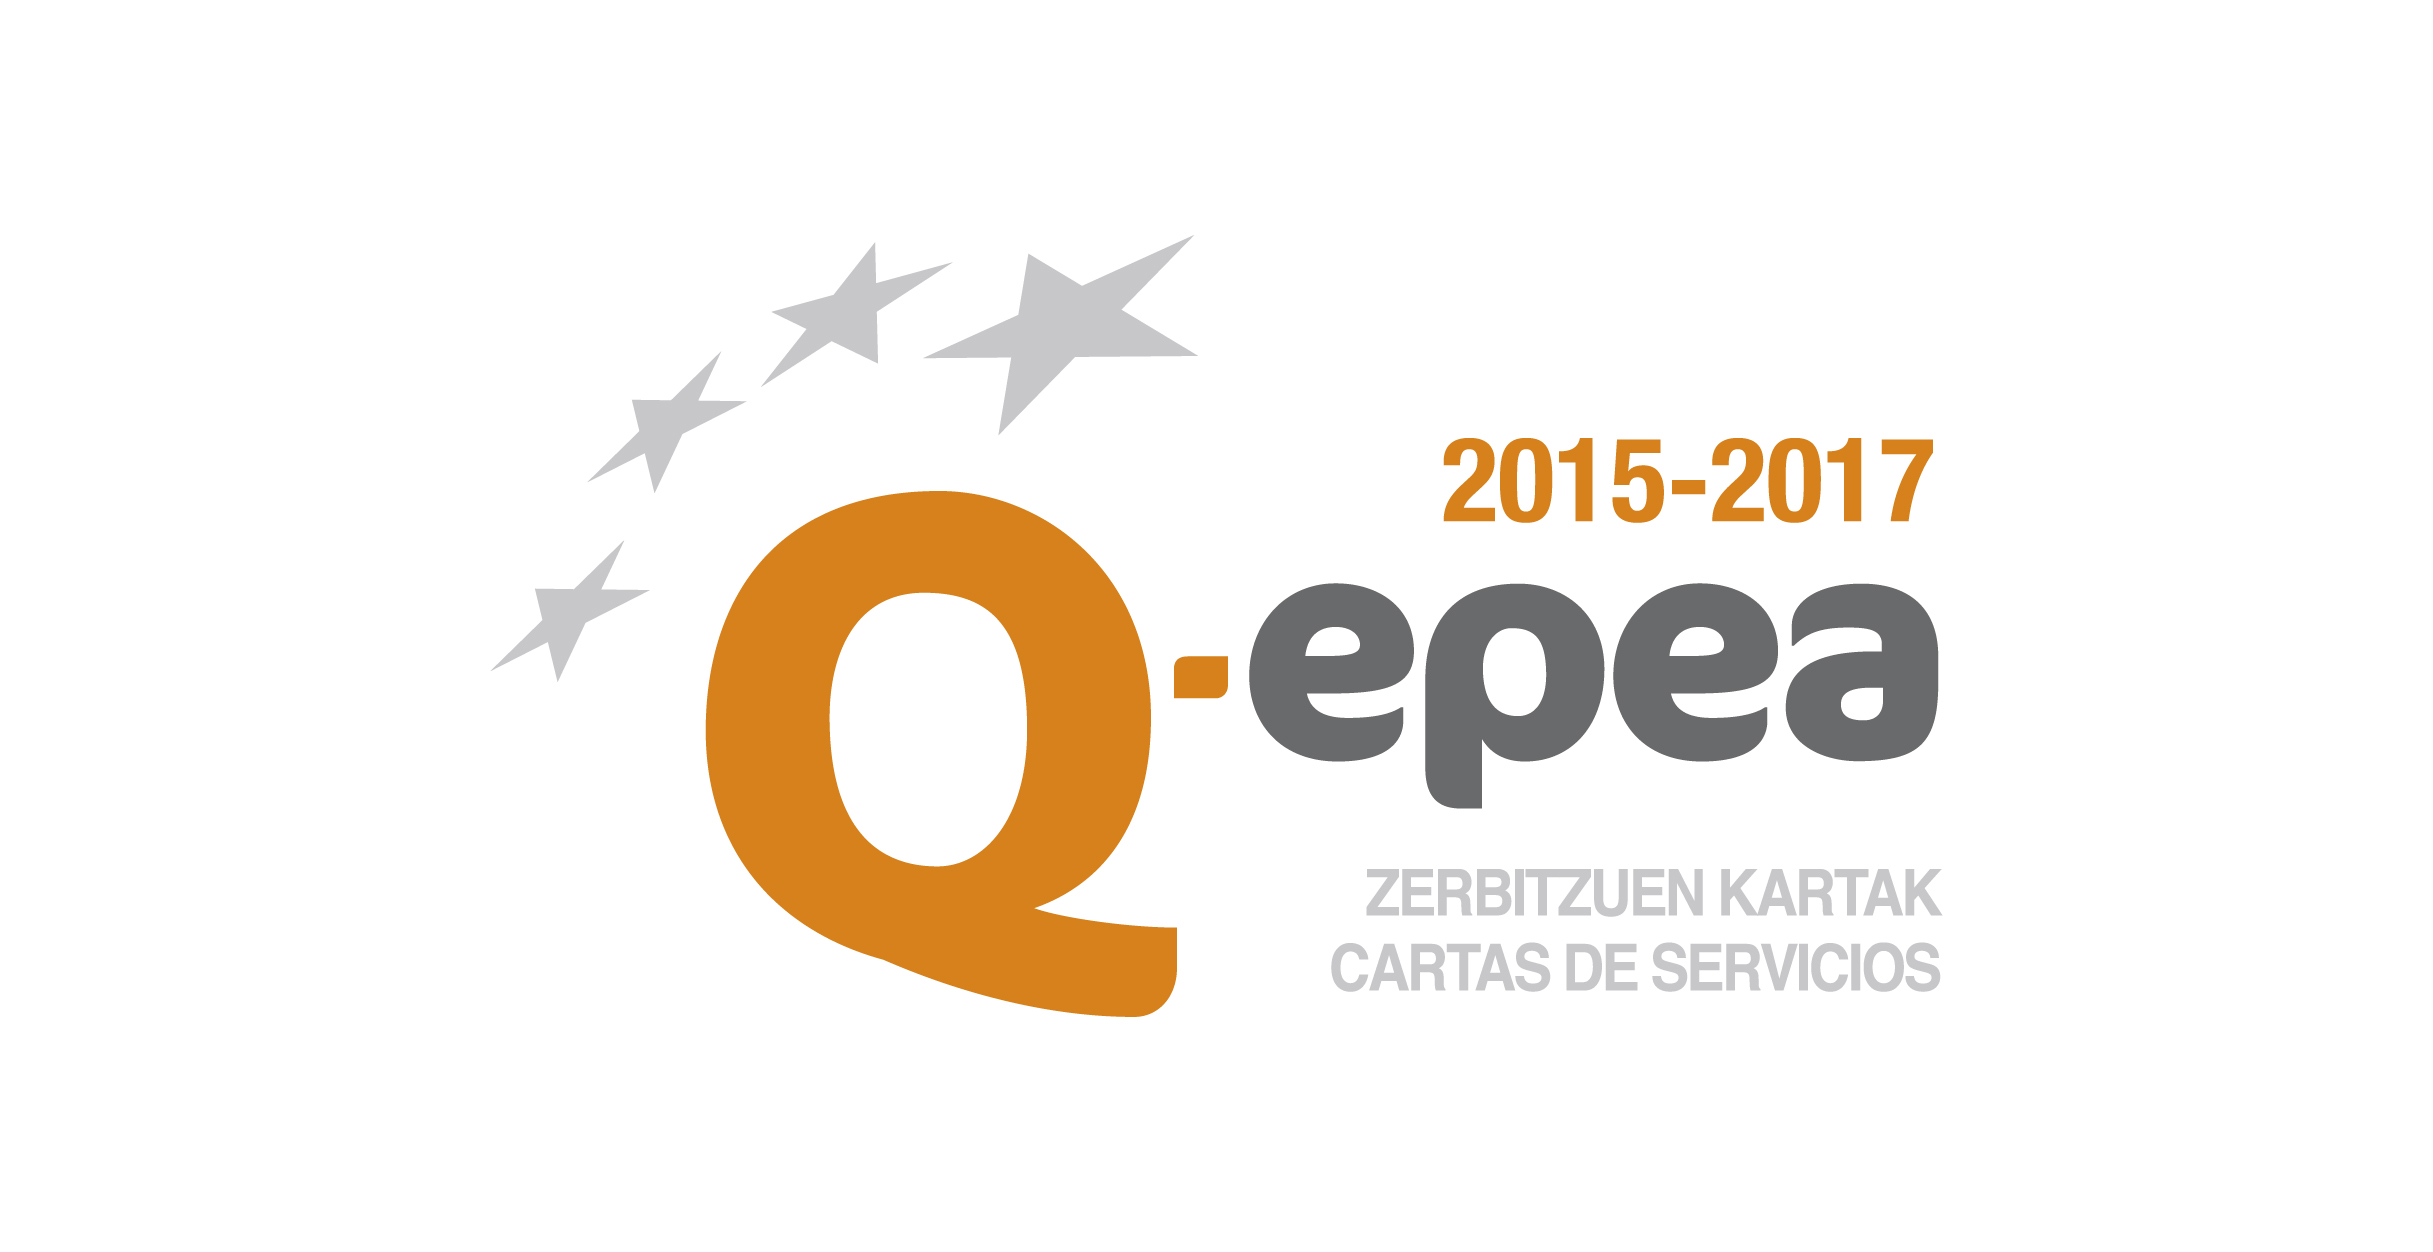 ZM Q-epea 2015-2017